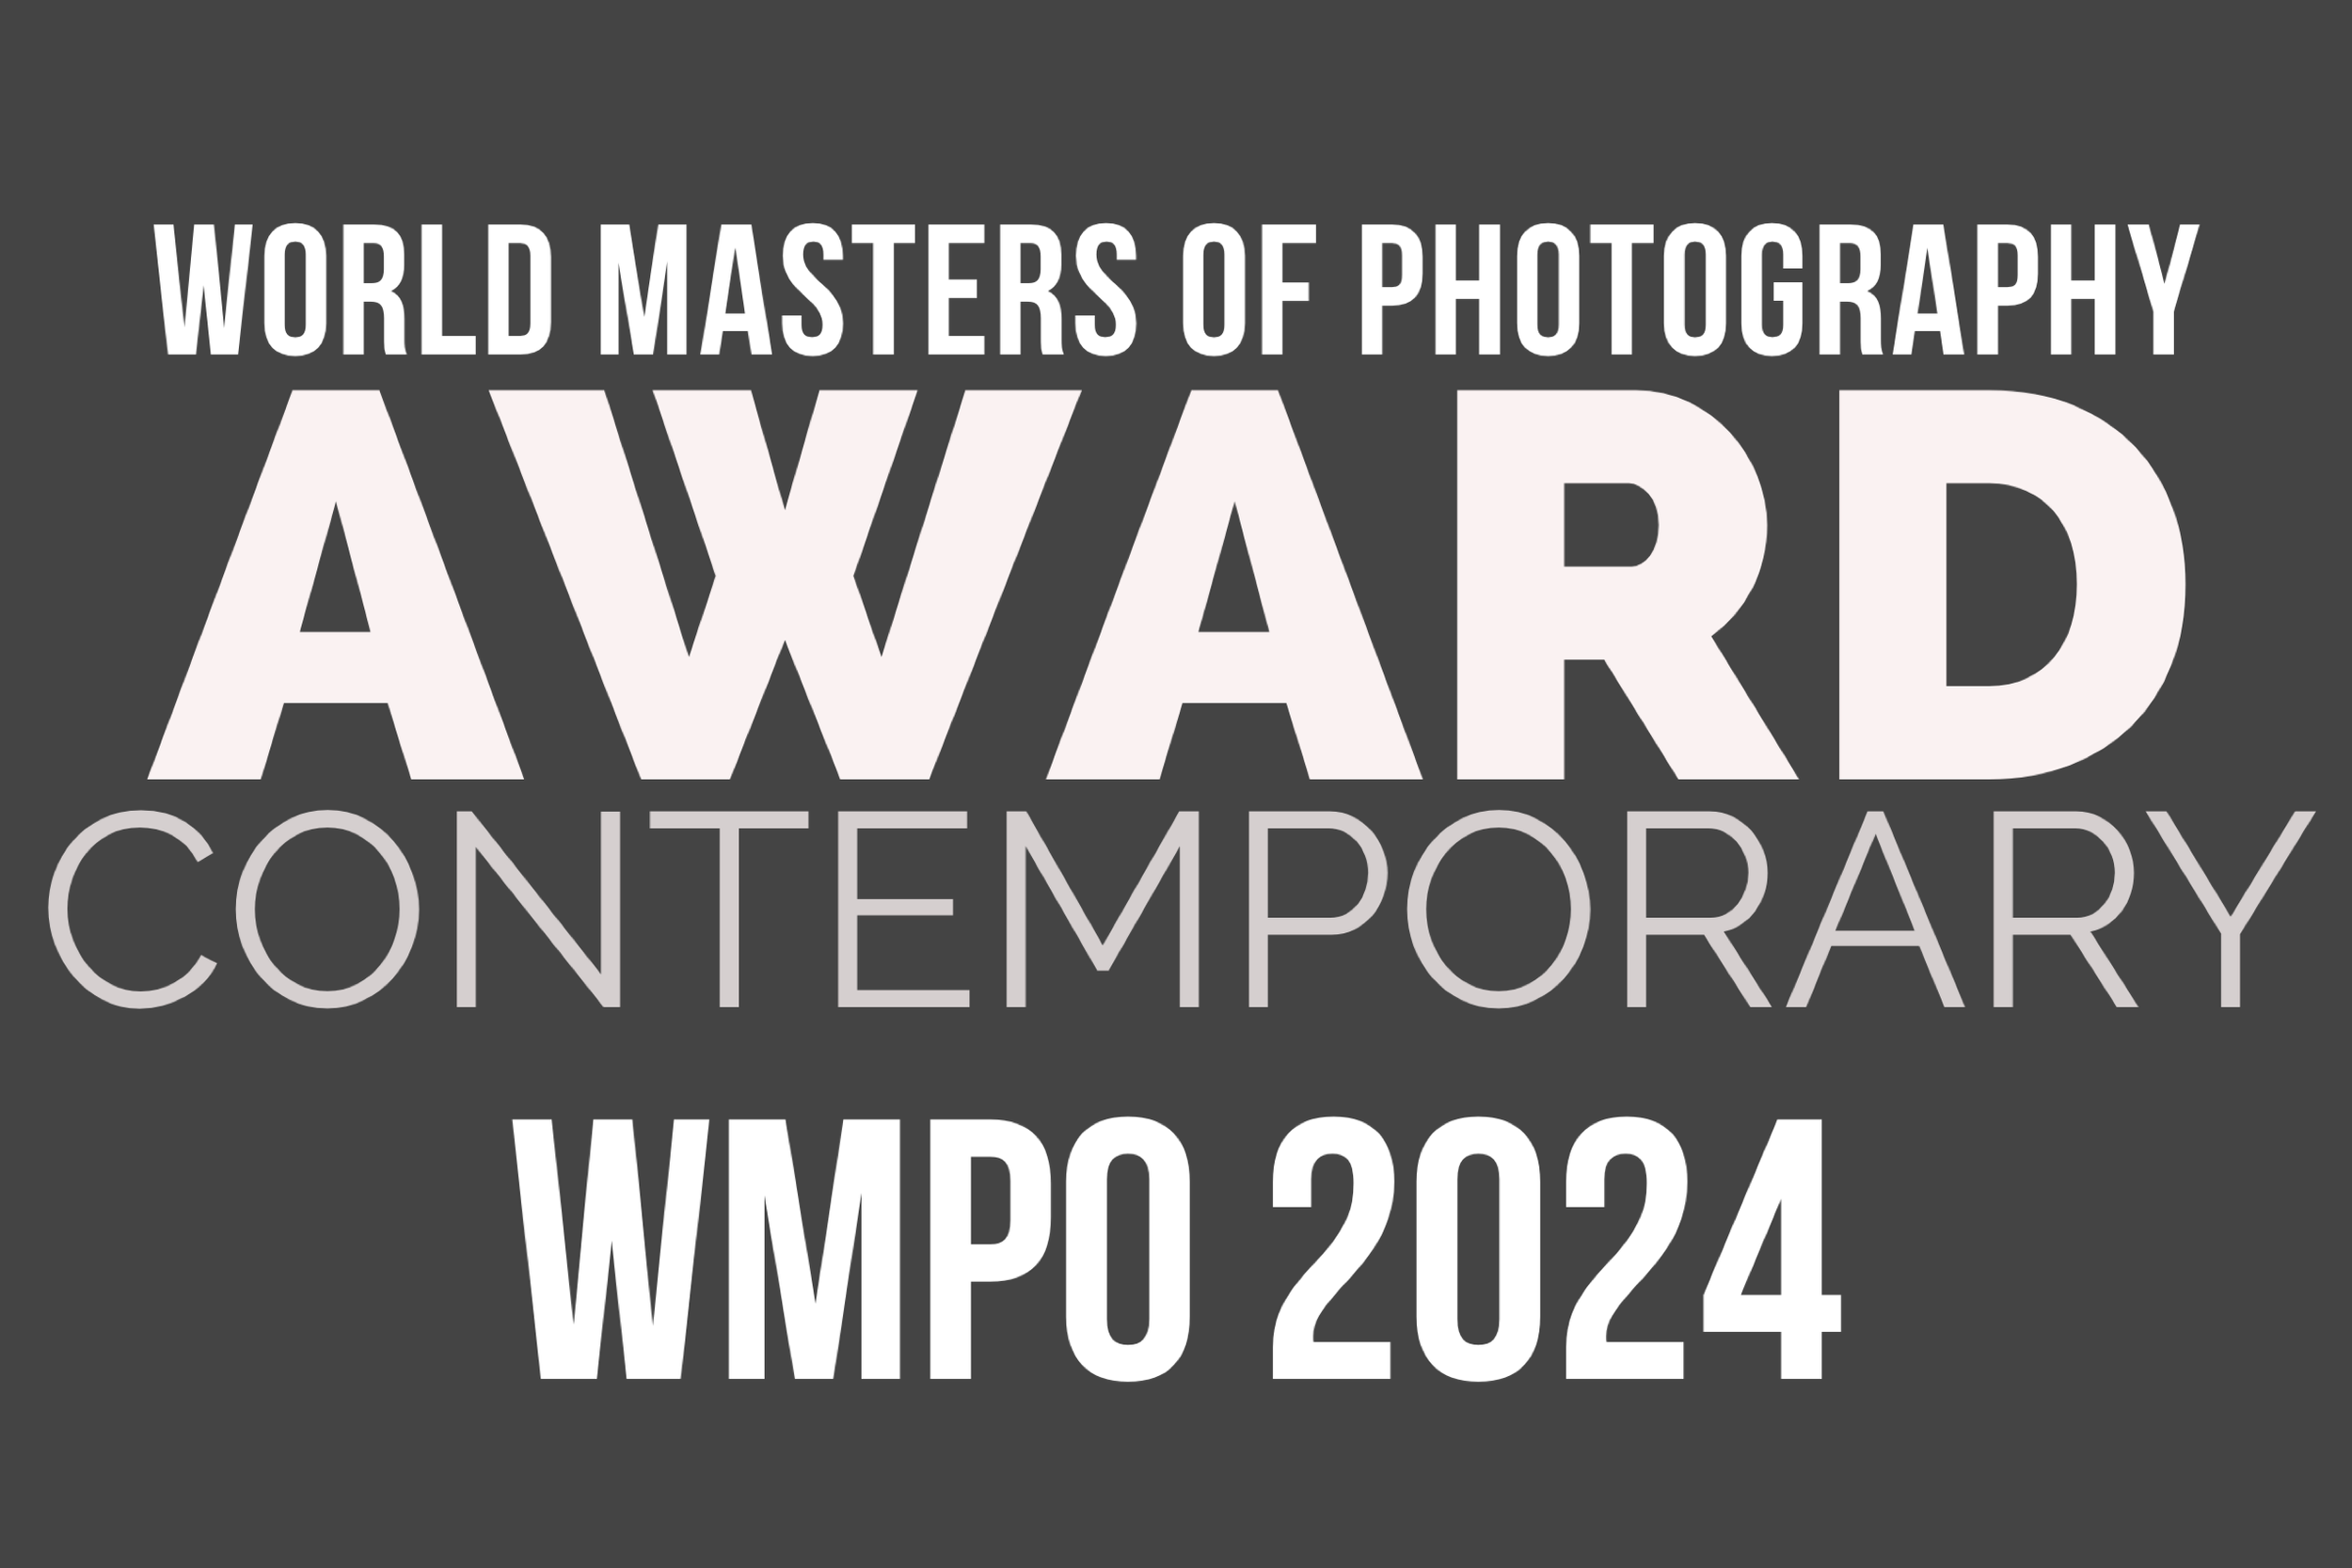 WMPO Photo Awards 2024 - World Masters of Photography Awards006.PNG